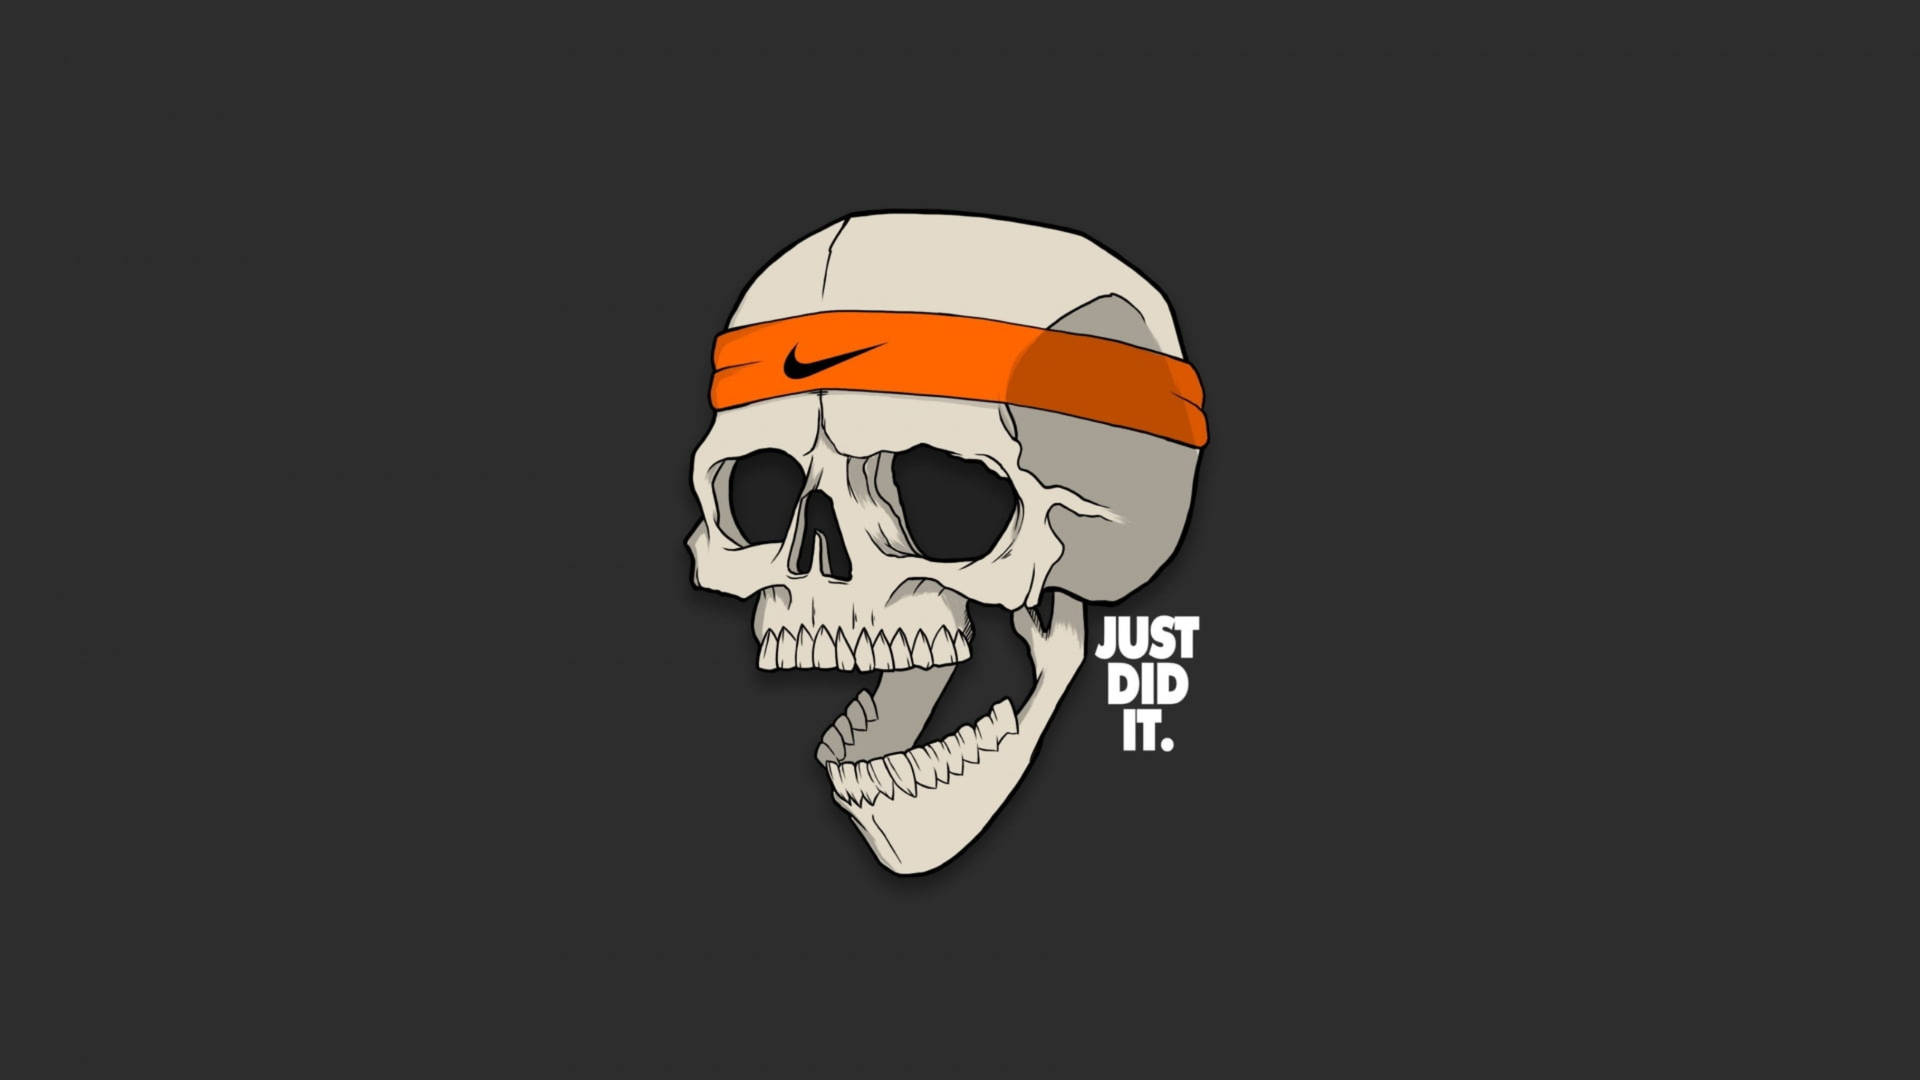 Top 999+ Just Do It Wallpapers Full HD, 4K✅Free to Use